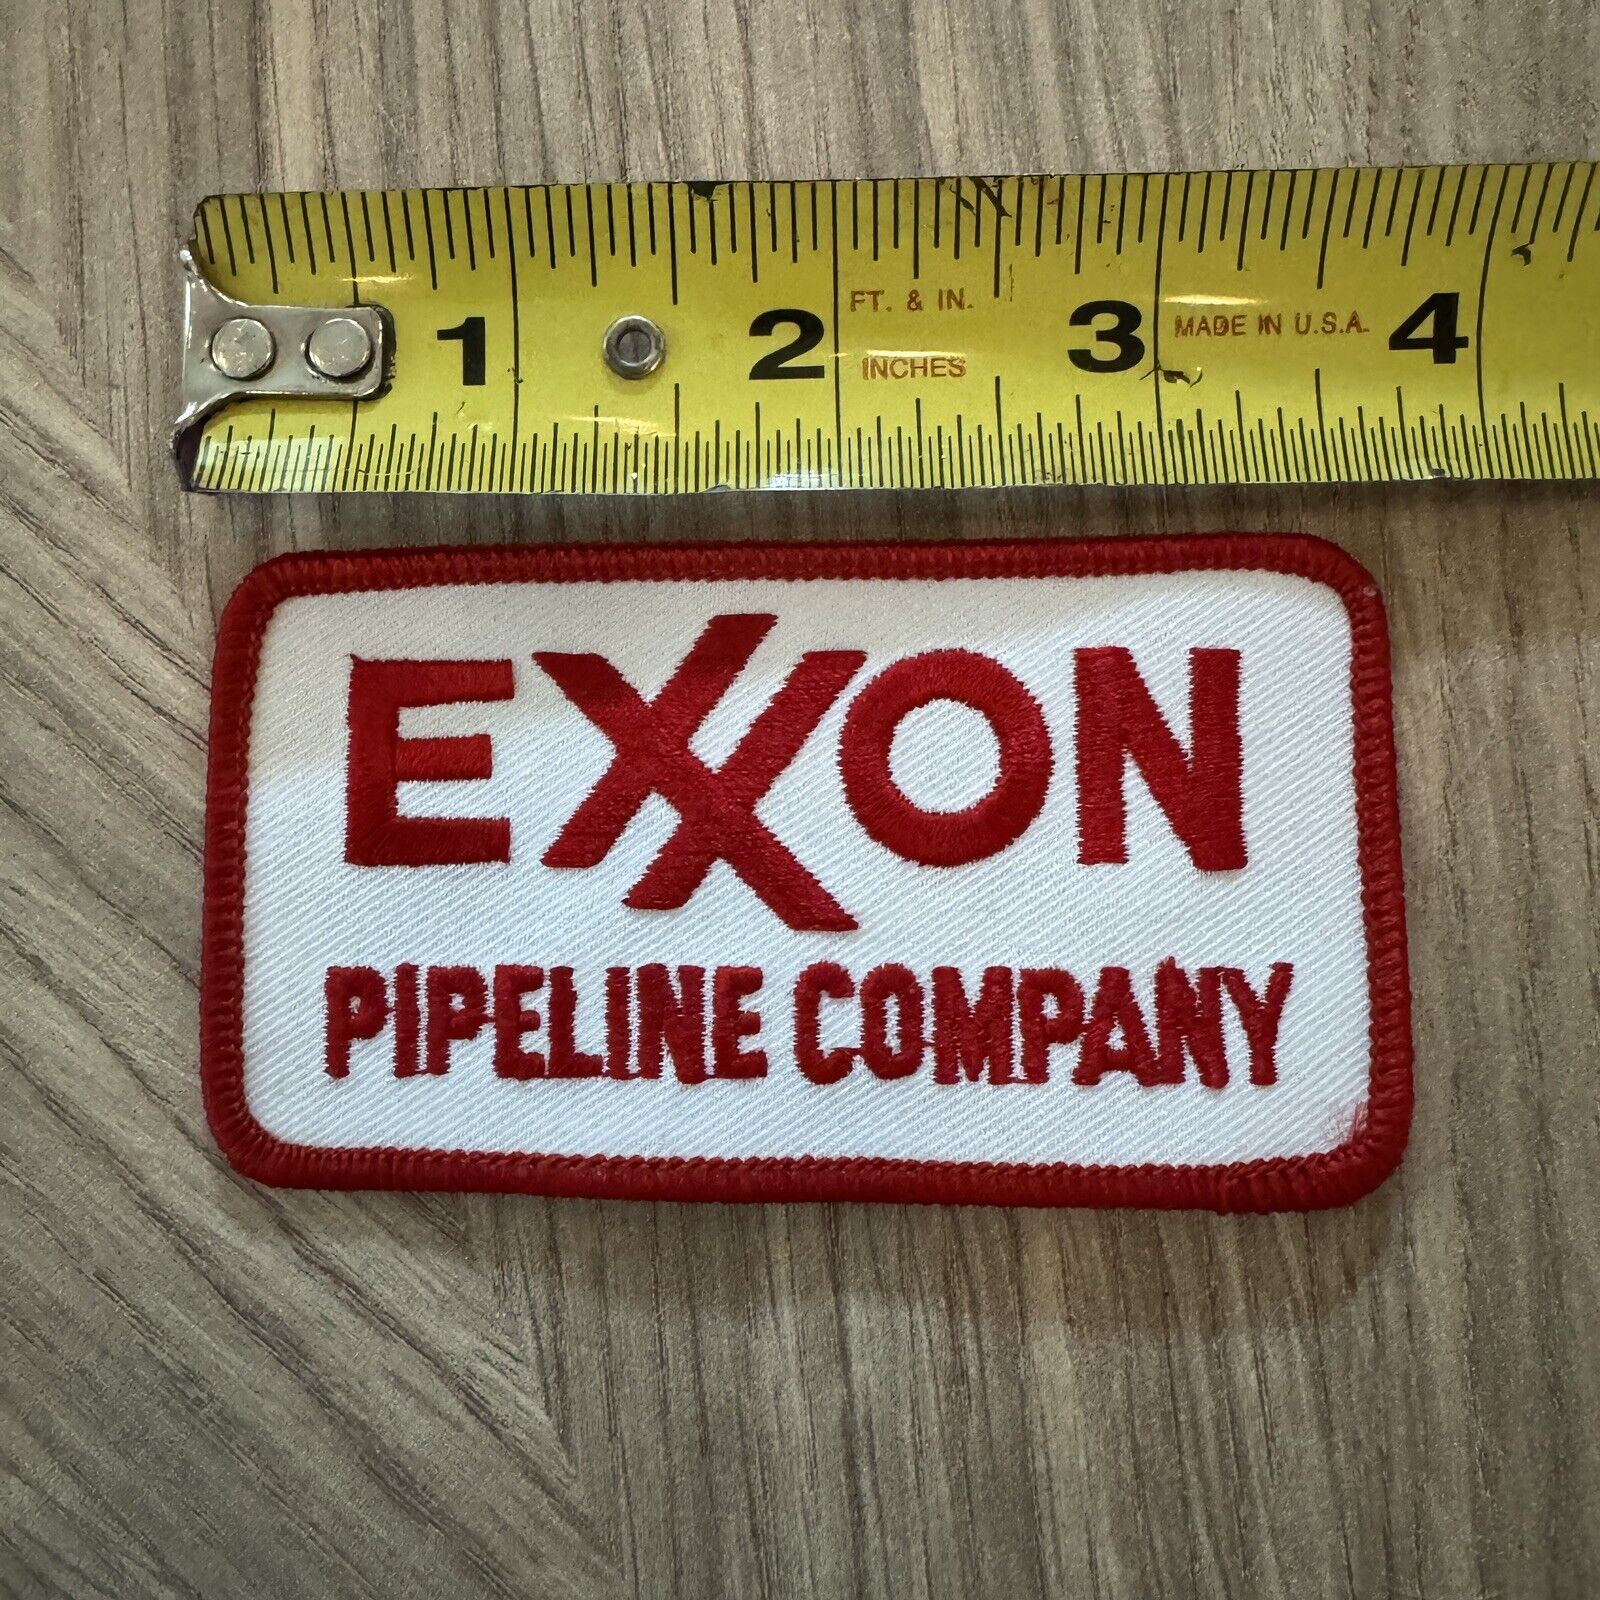 Vintage 80s EXXON Pipeline Company Sew On Patch